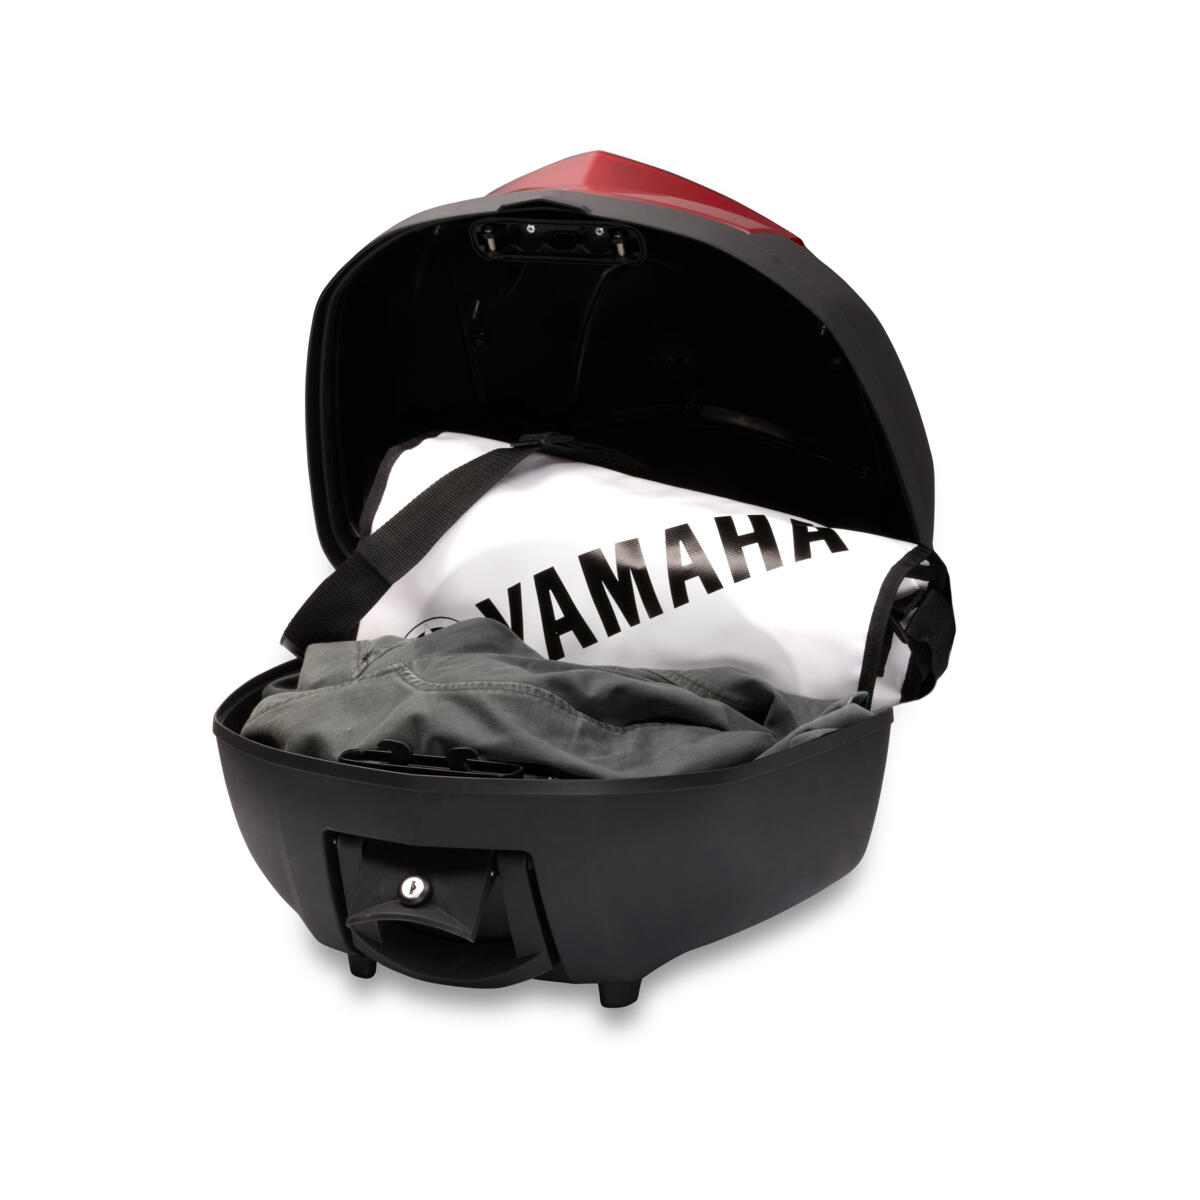 Quality top case for extra luggage/storage capacity on your Yamaha..